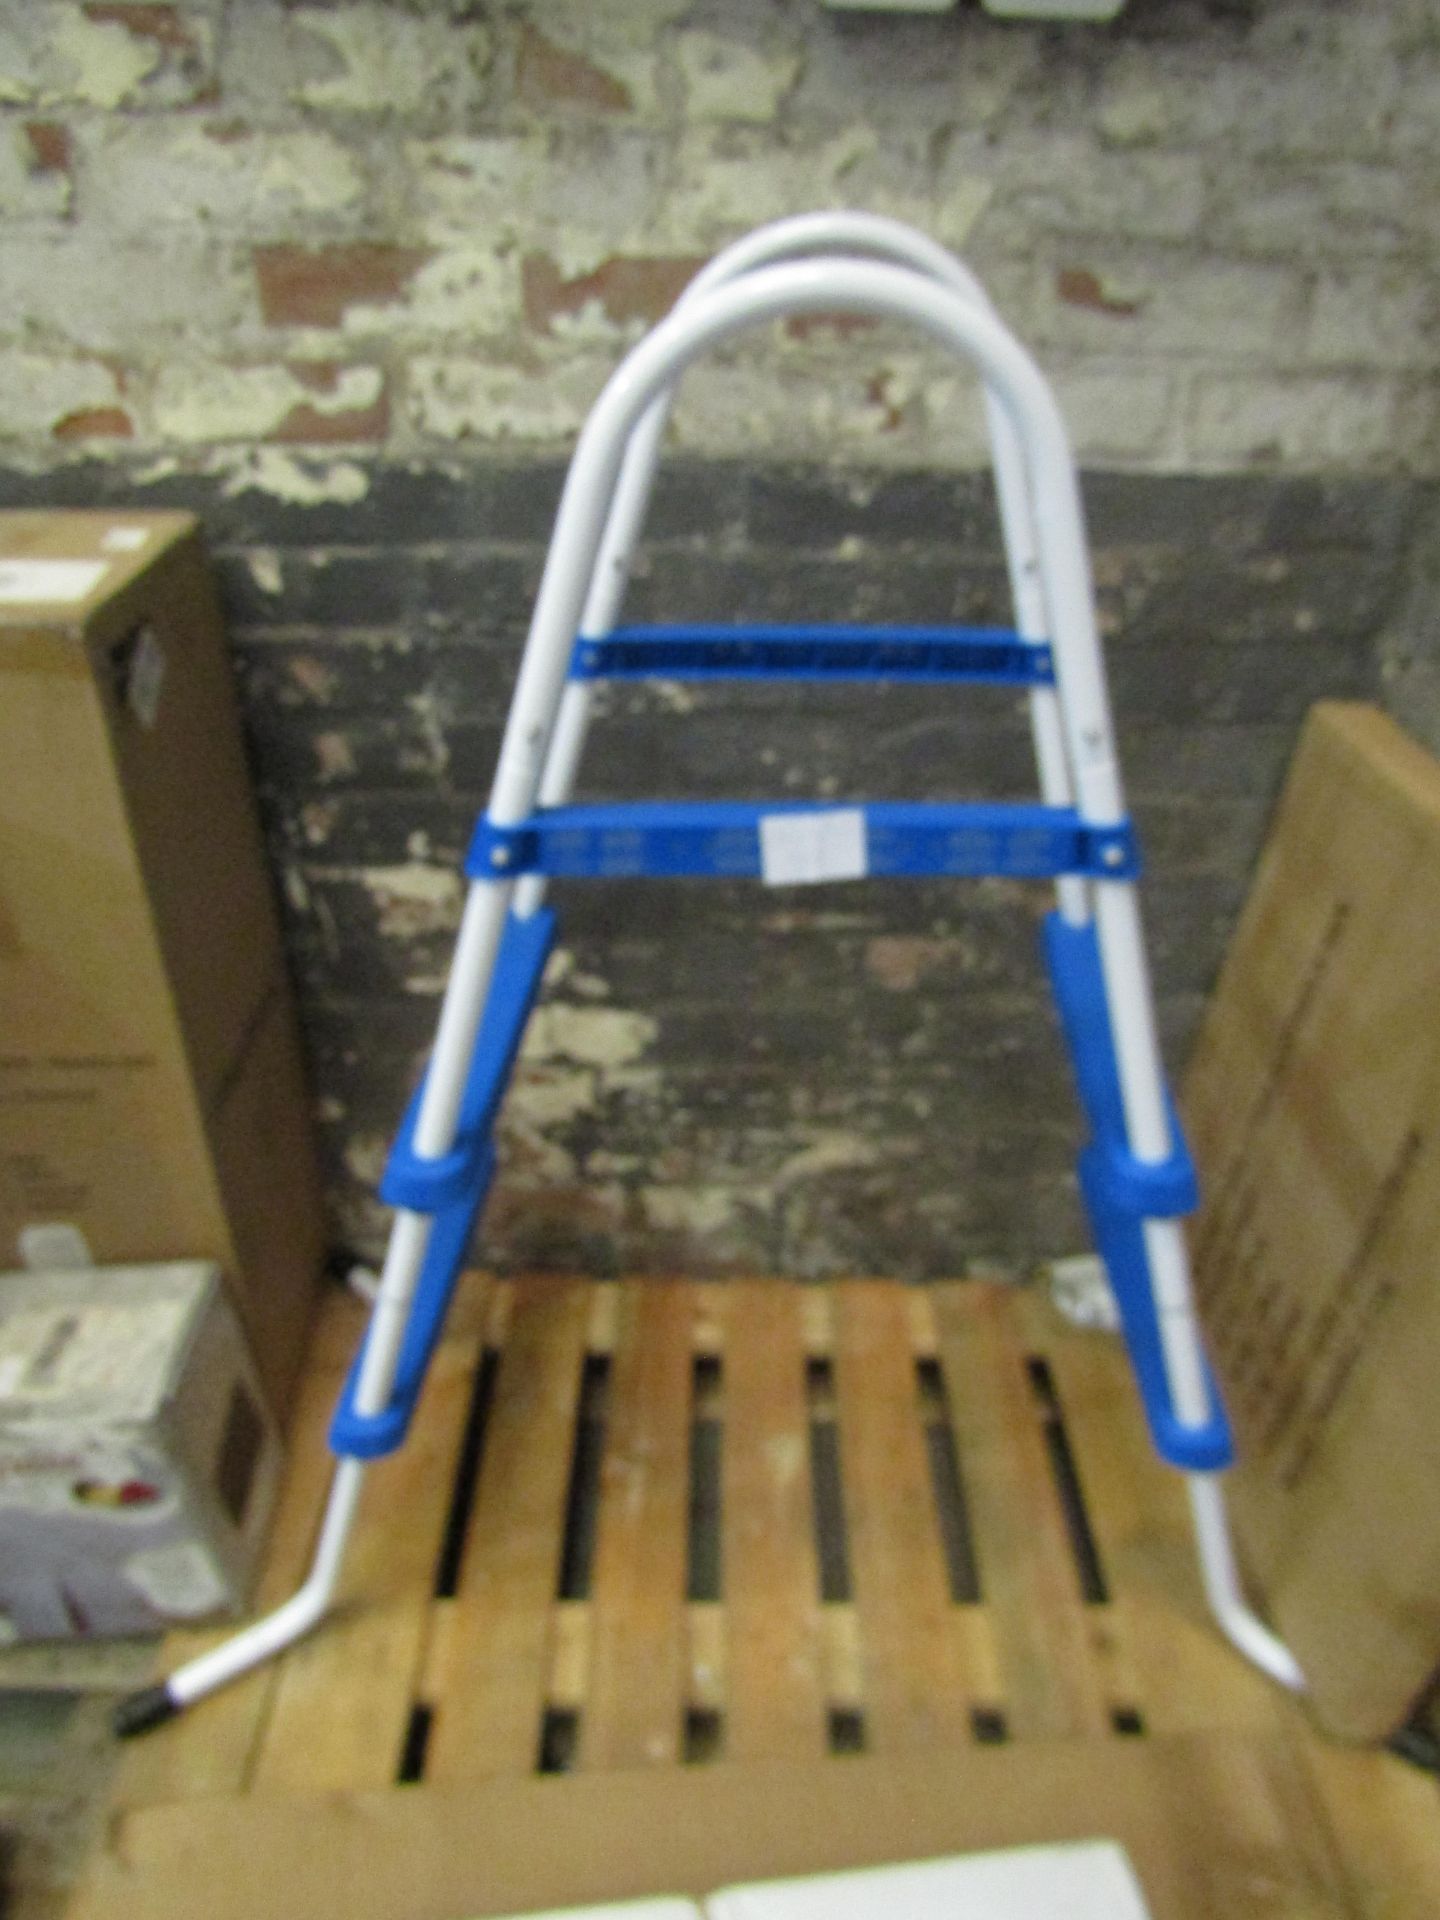 2 Step Pool Ladder, Looks In Good Condition.